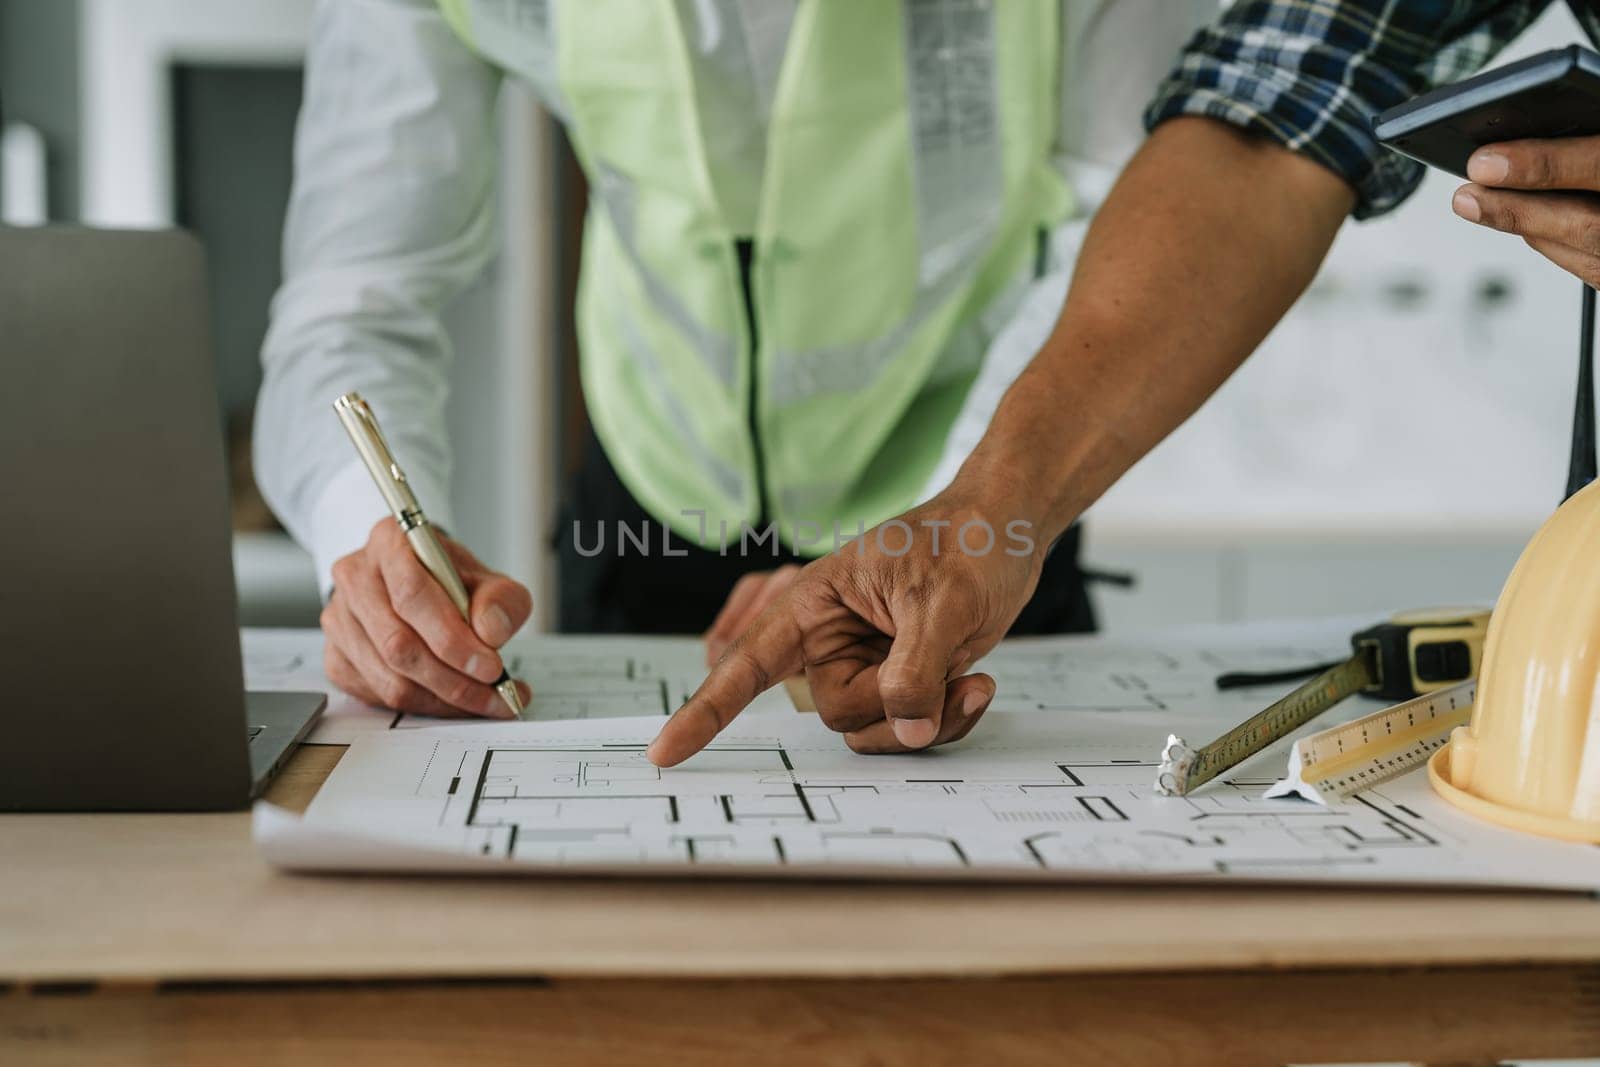 multi ethnic engineer brainstorming and measuring for cost estimating on paperworks and floor plan drawings about design architectural and engineering for houses and buildings.